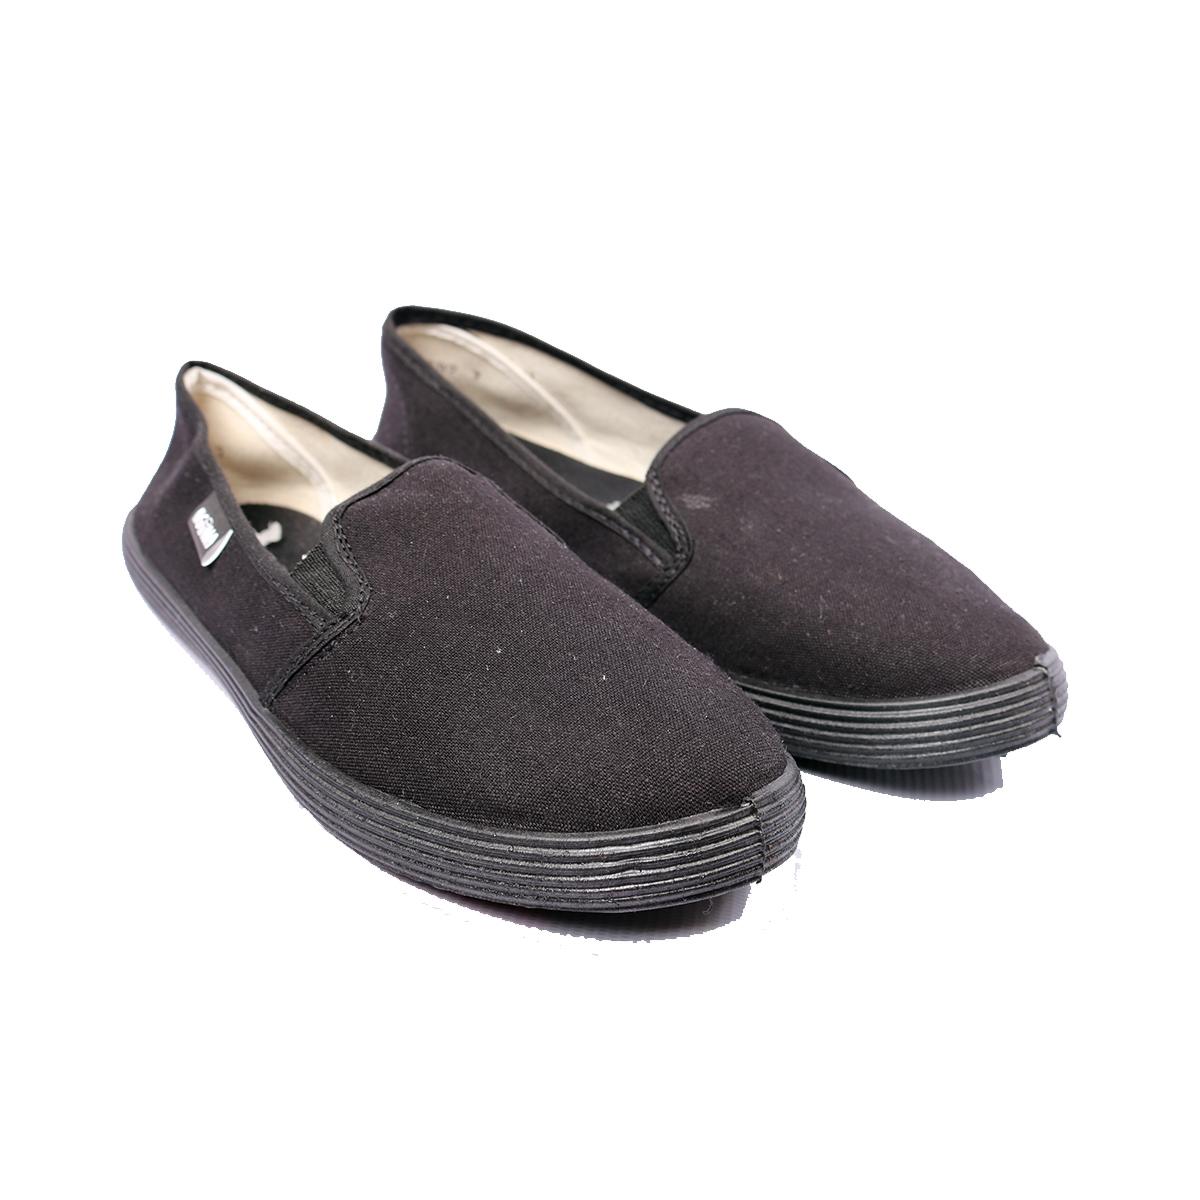 ngoma rubber shoes price